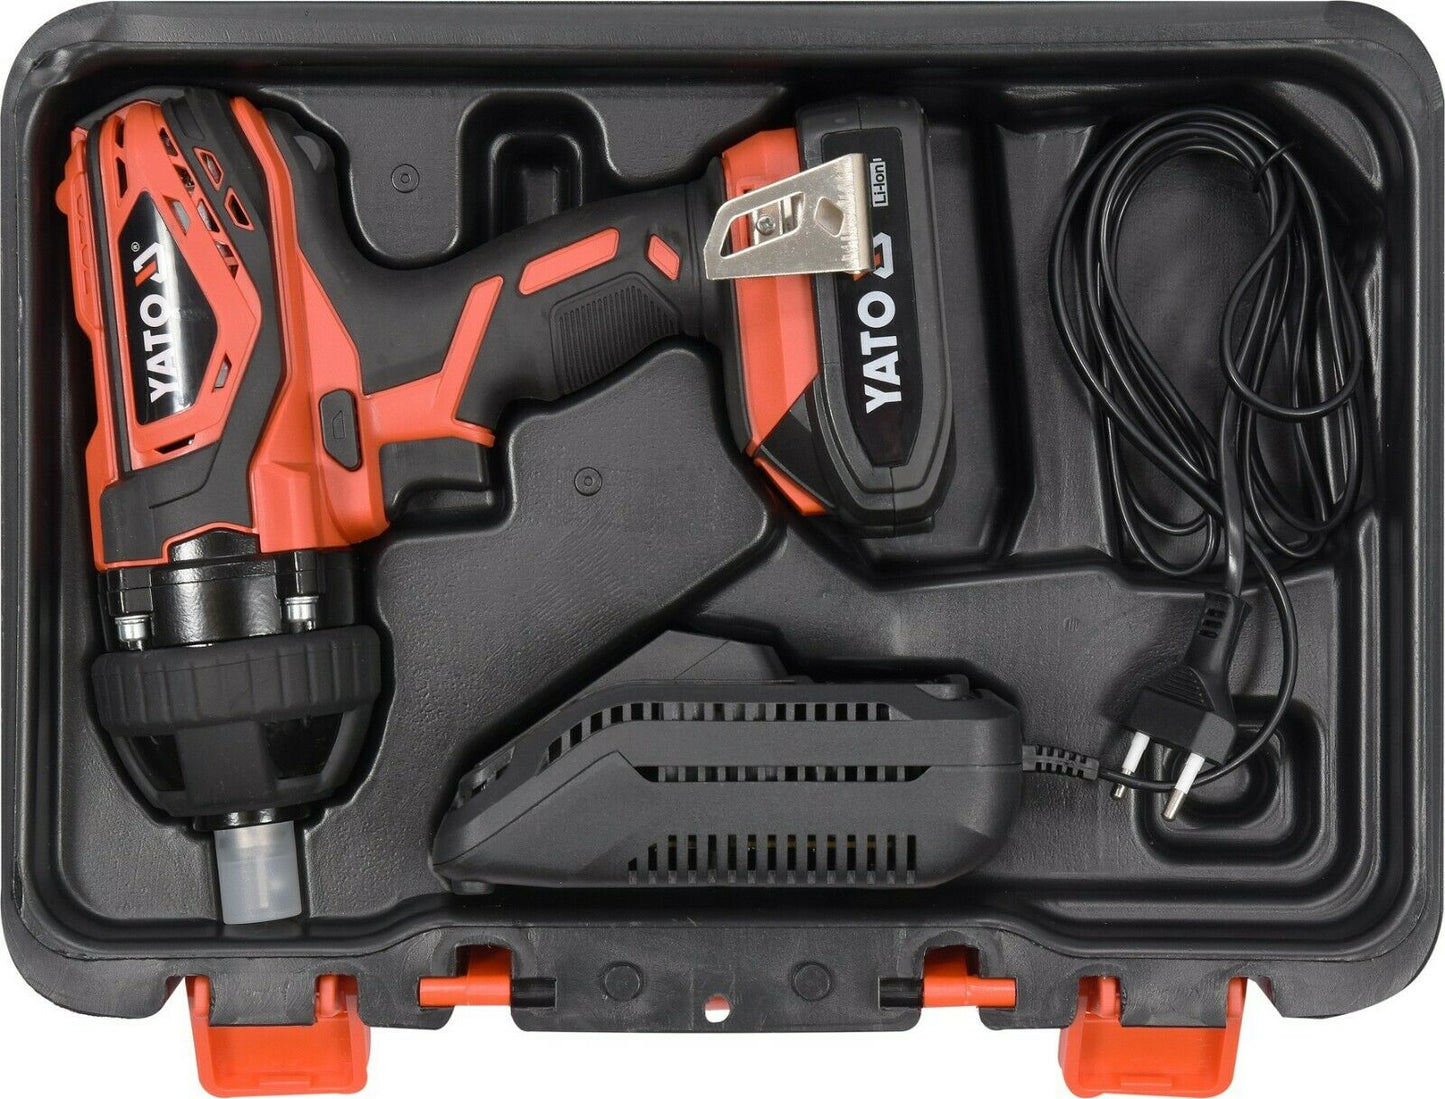 Yato battery pitcher 300NM cordless screwdriver charger screwer accu yt-82804